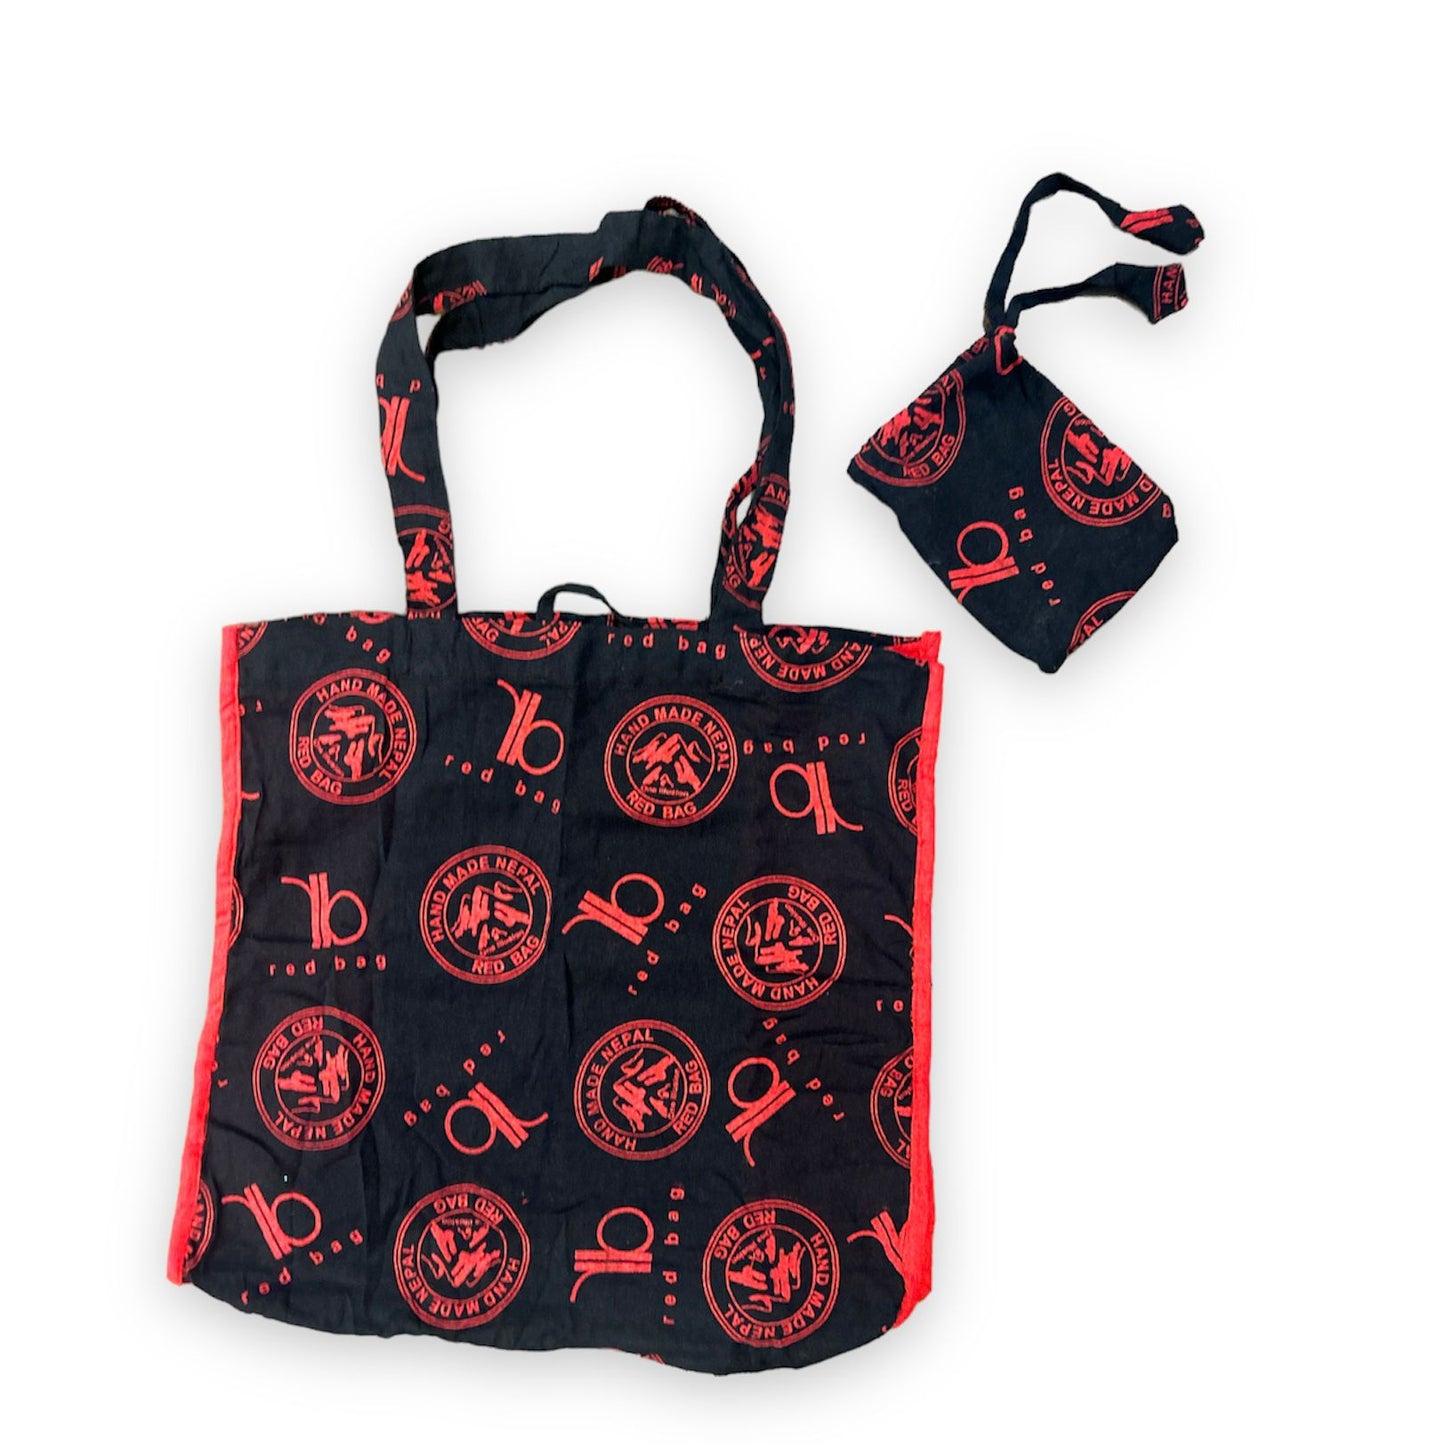 Foldable Red Bag